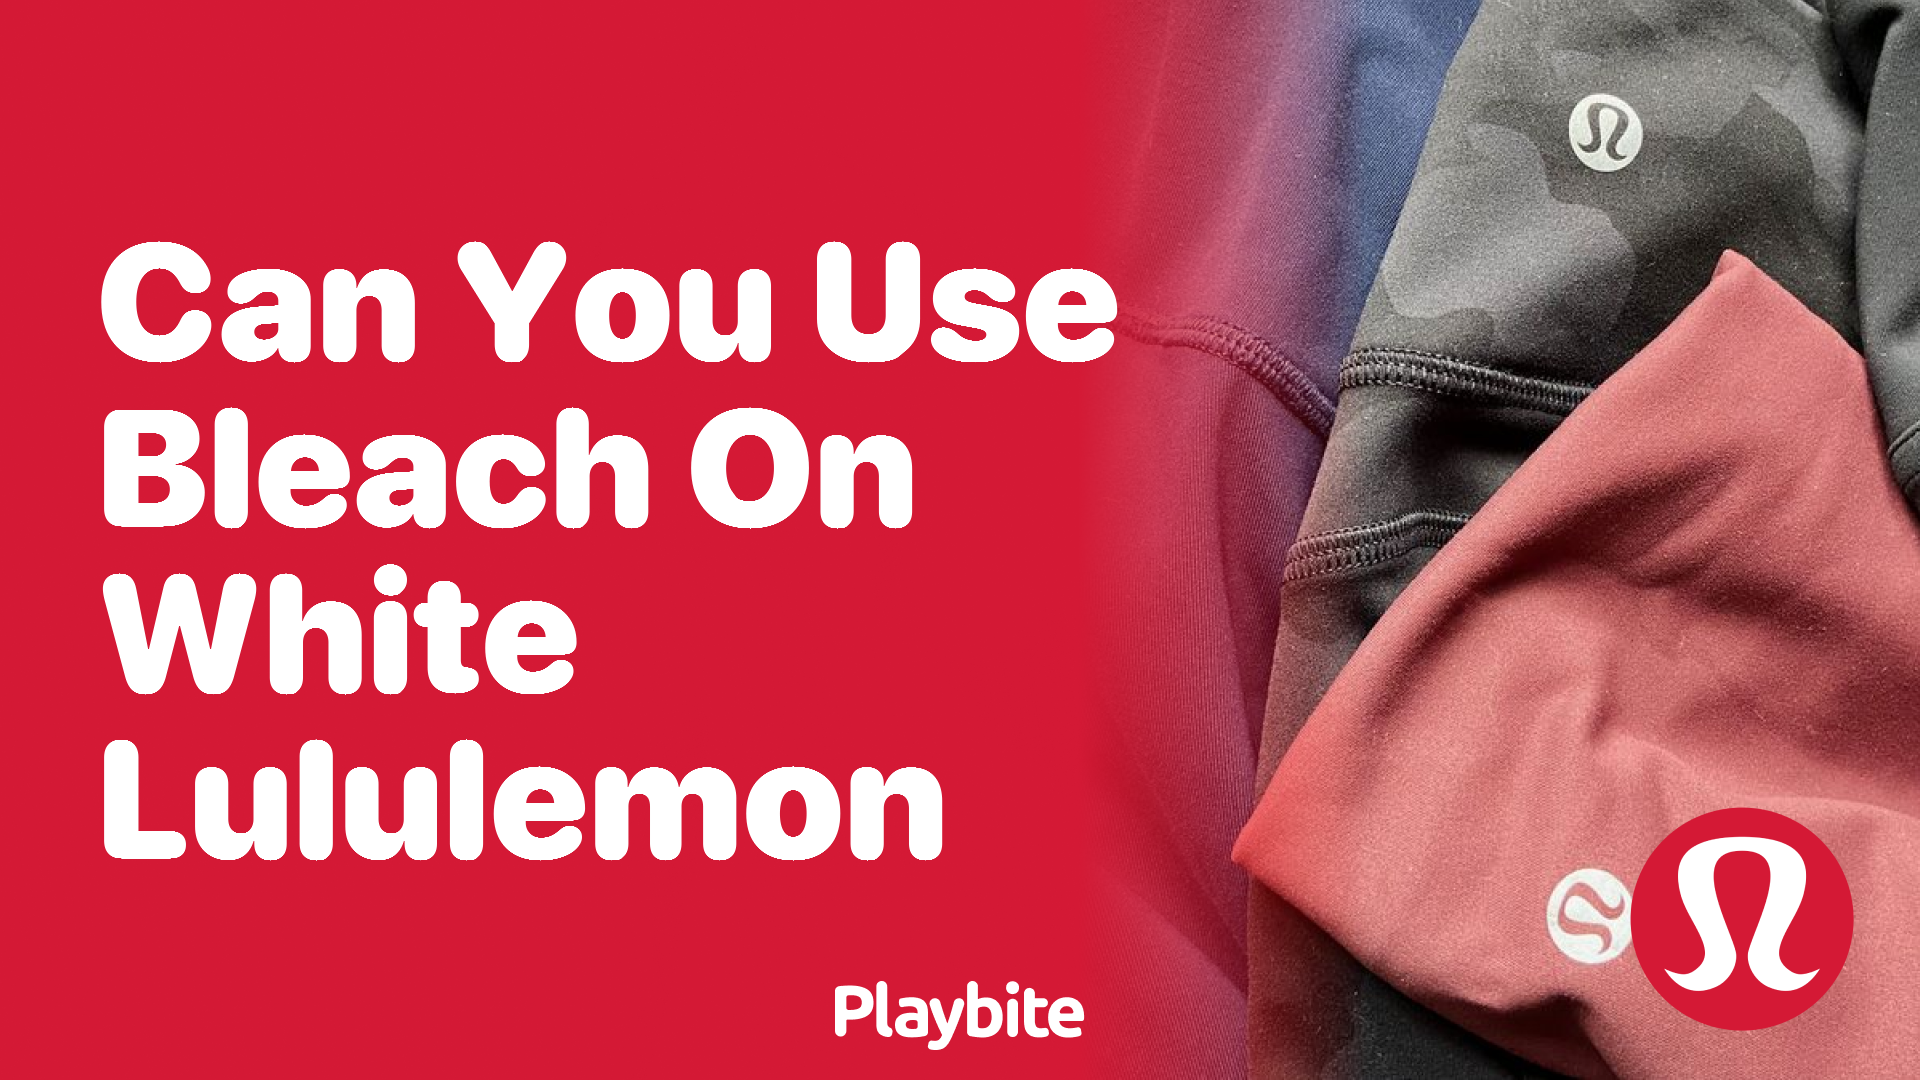 Am I a Size 4 or 6 in Lululemon? Find Out Now! - Playbite